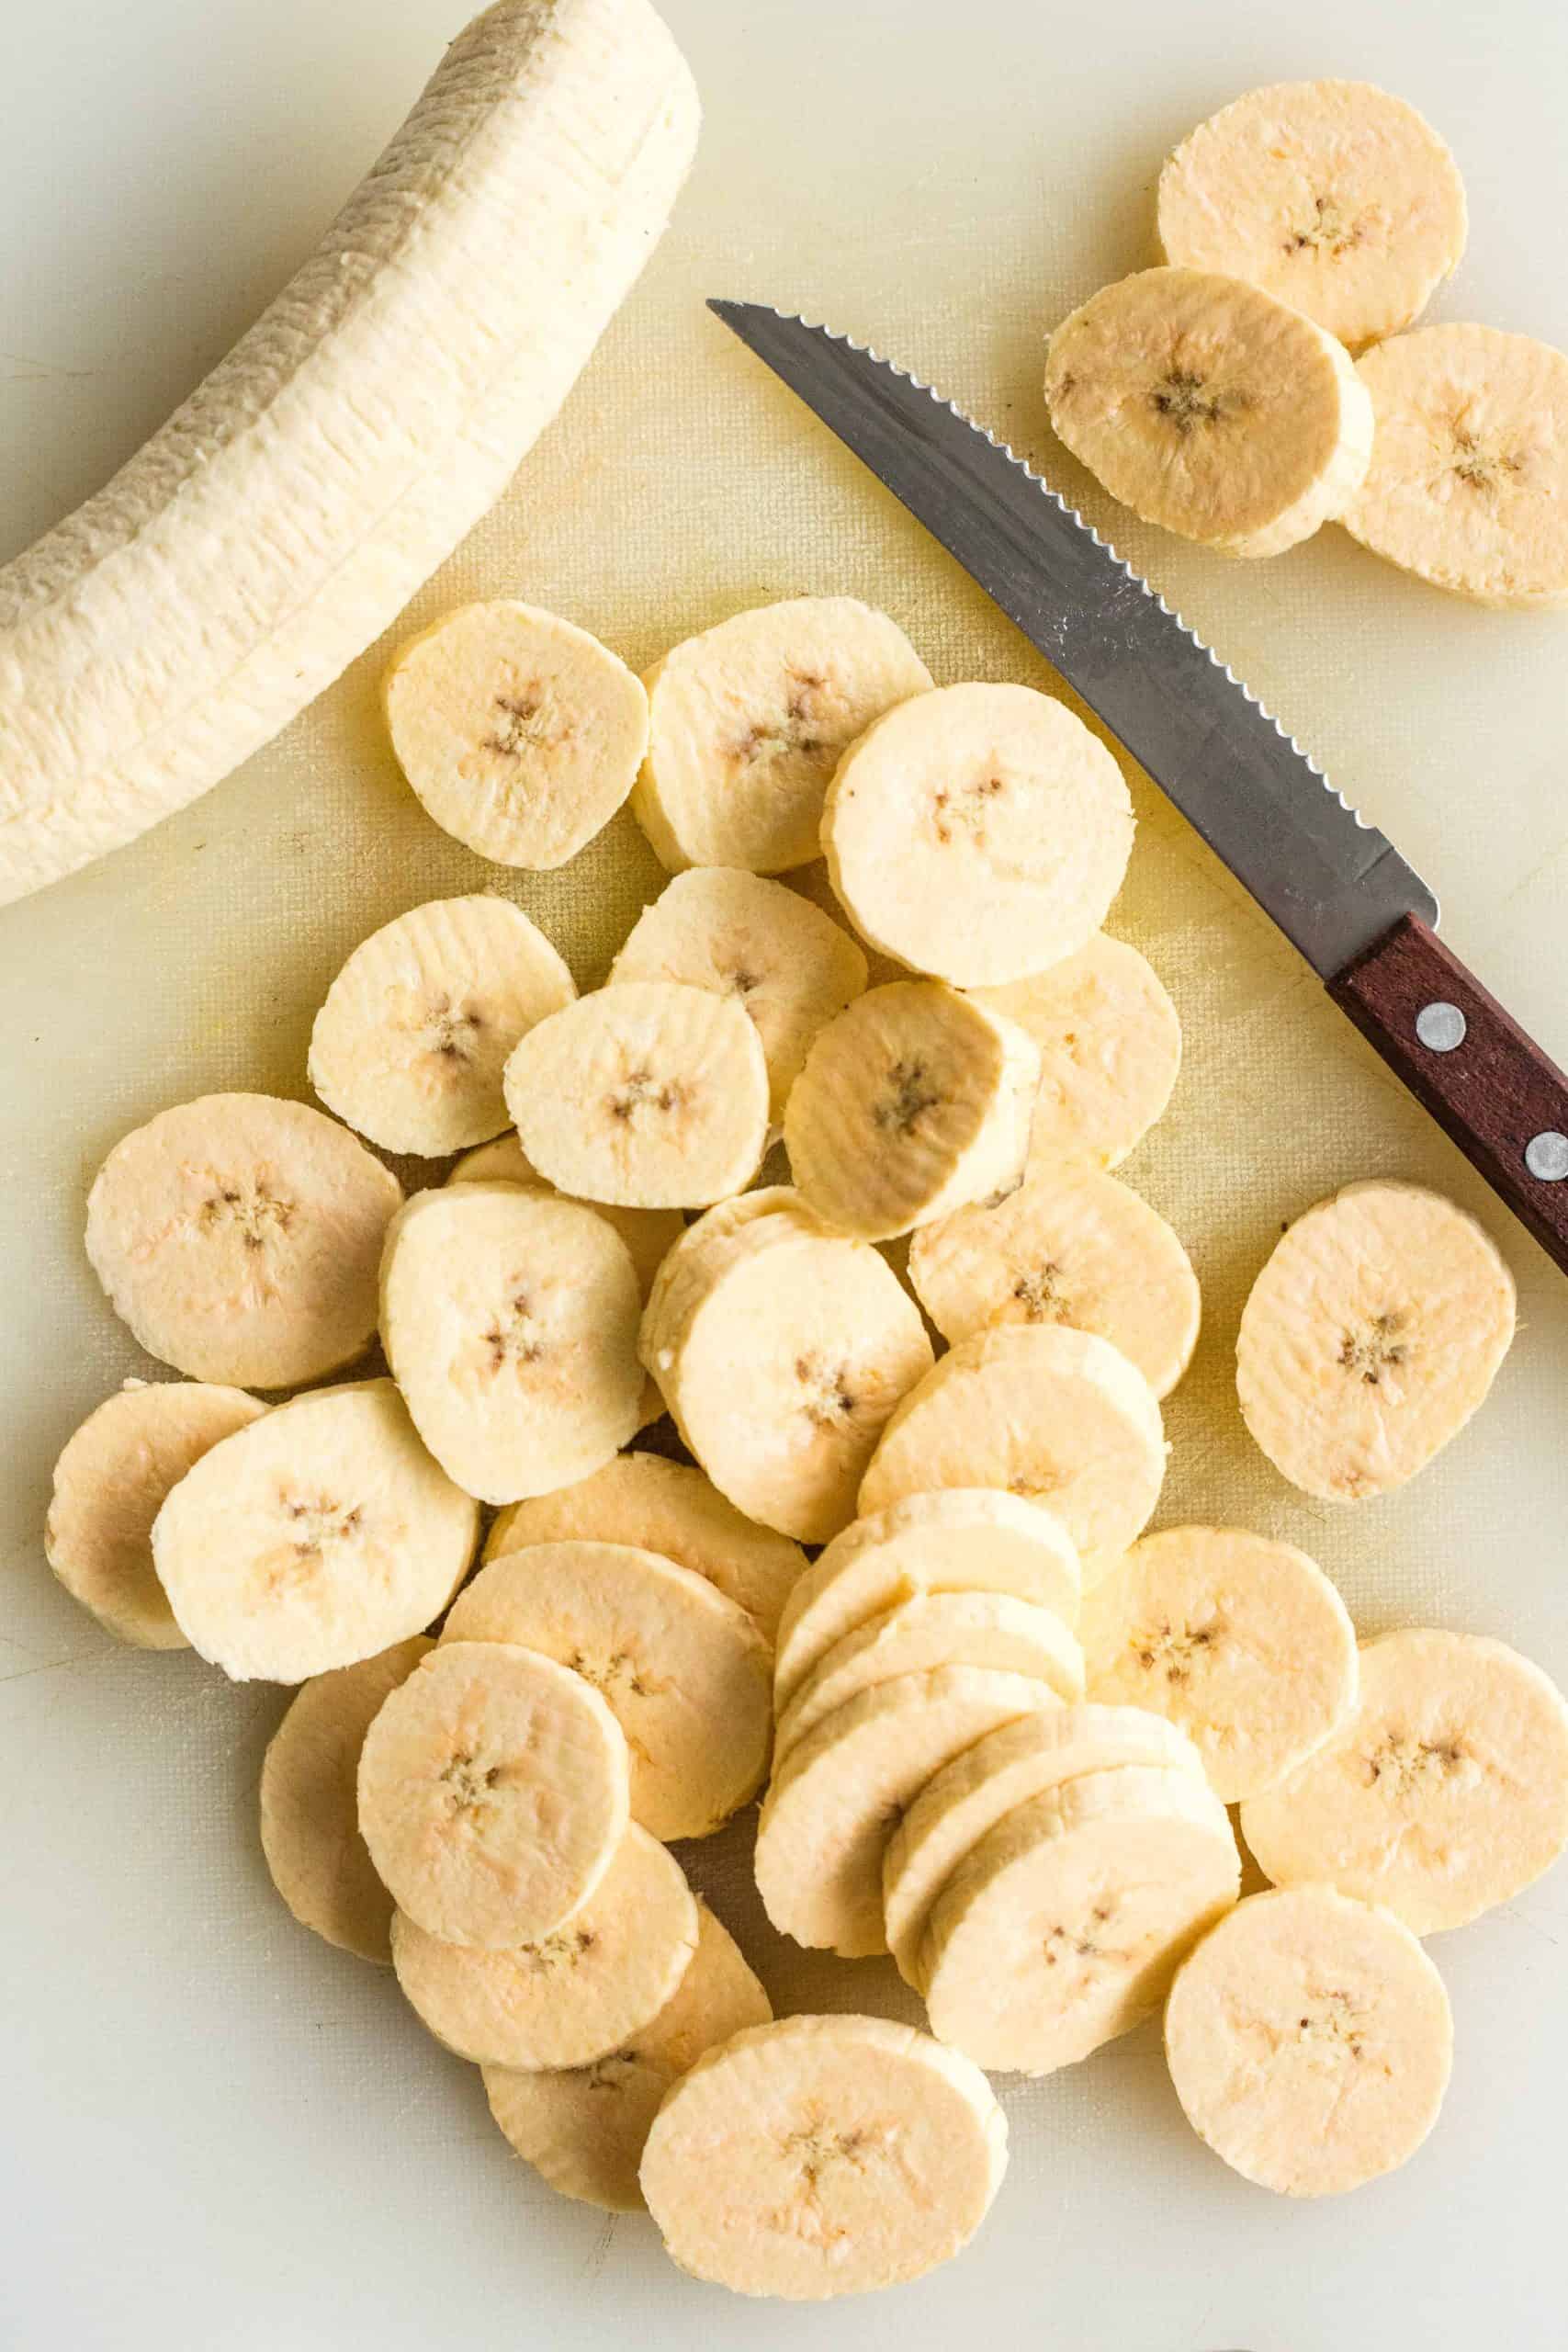 Sliced plantains and a knife on a chopping board.